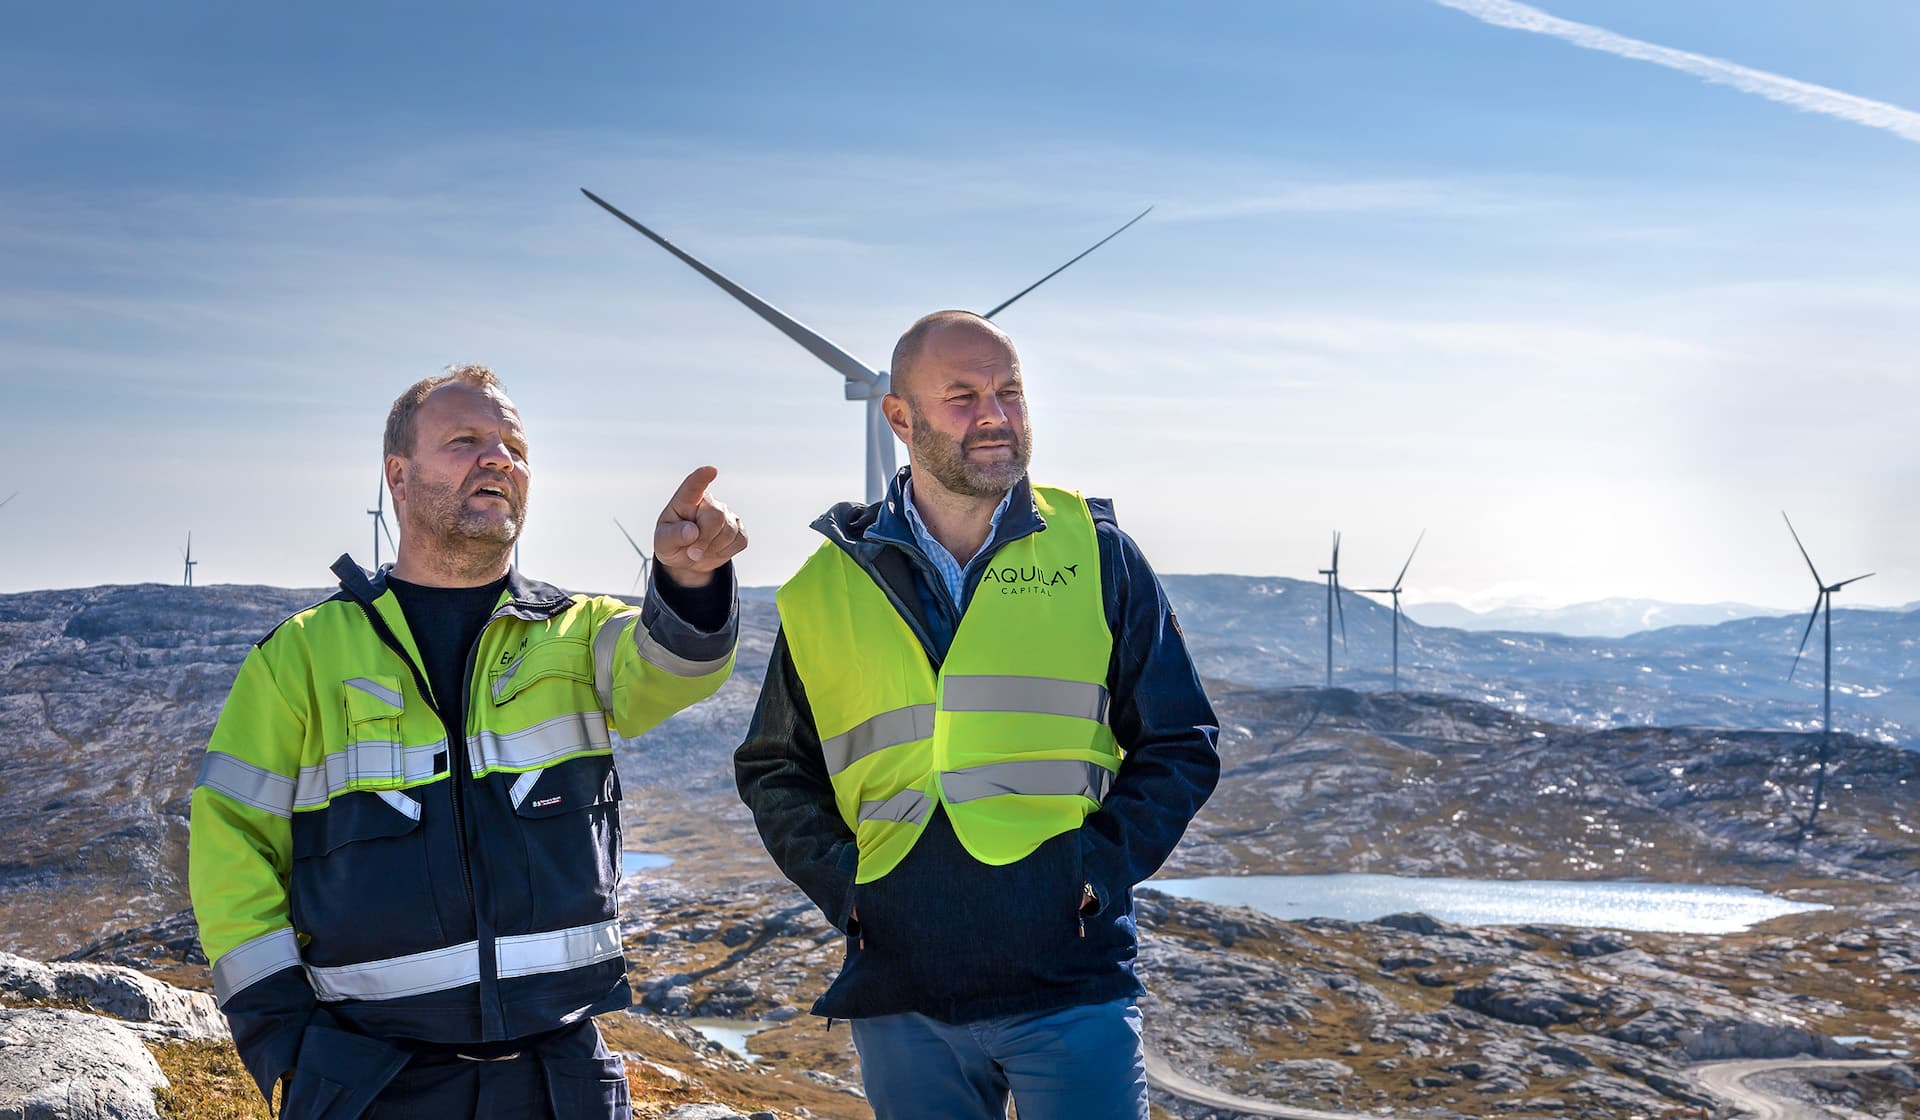 Two men wearing reflective vest and talking in front of windmill plant in hilly landscape.